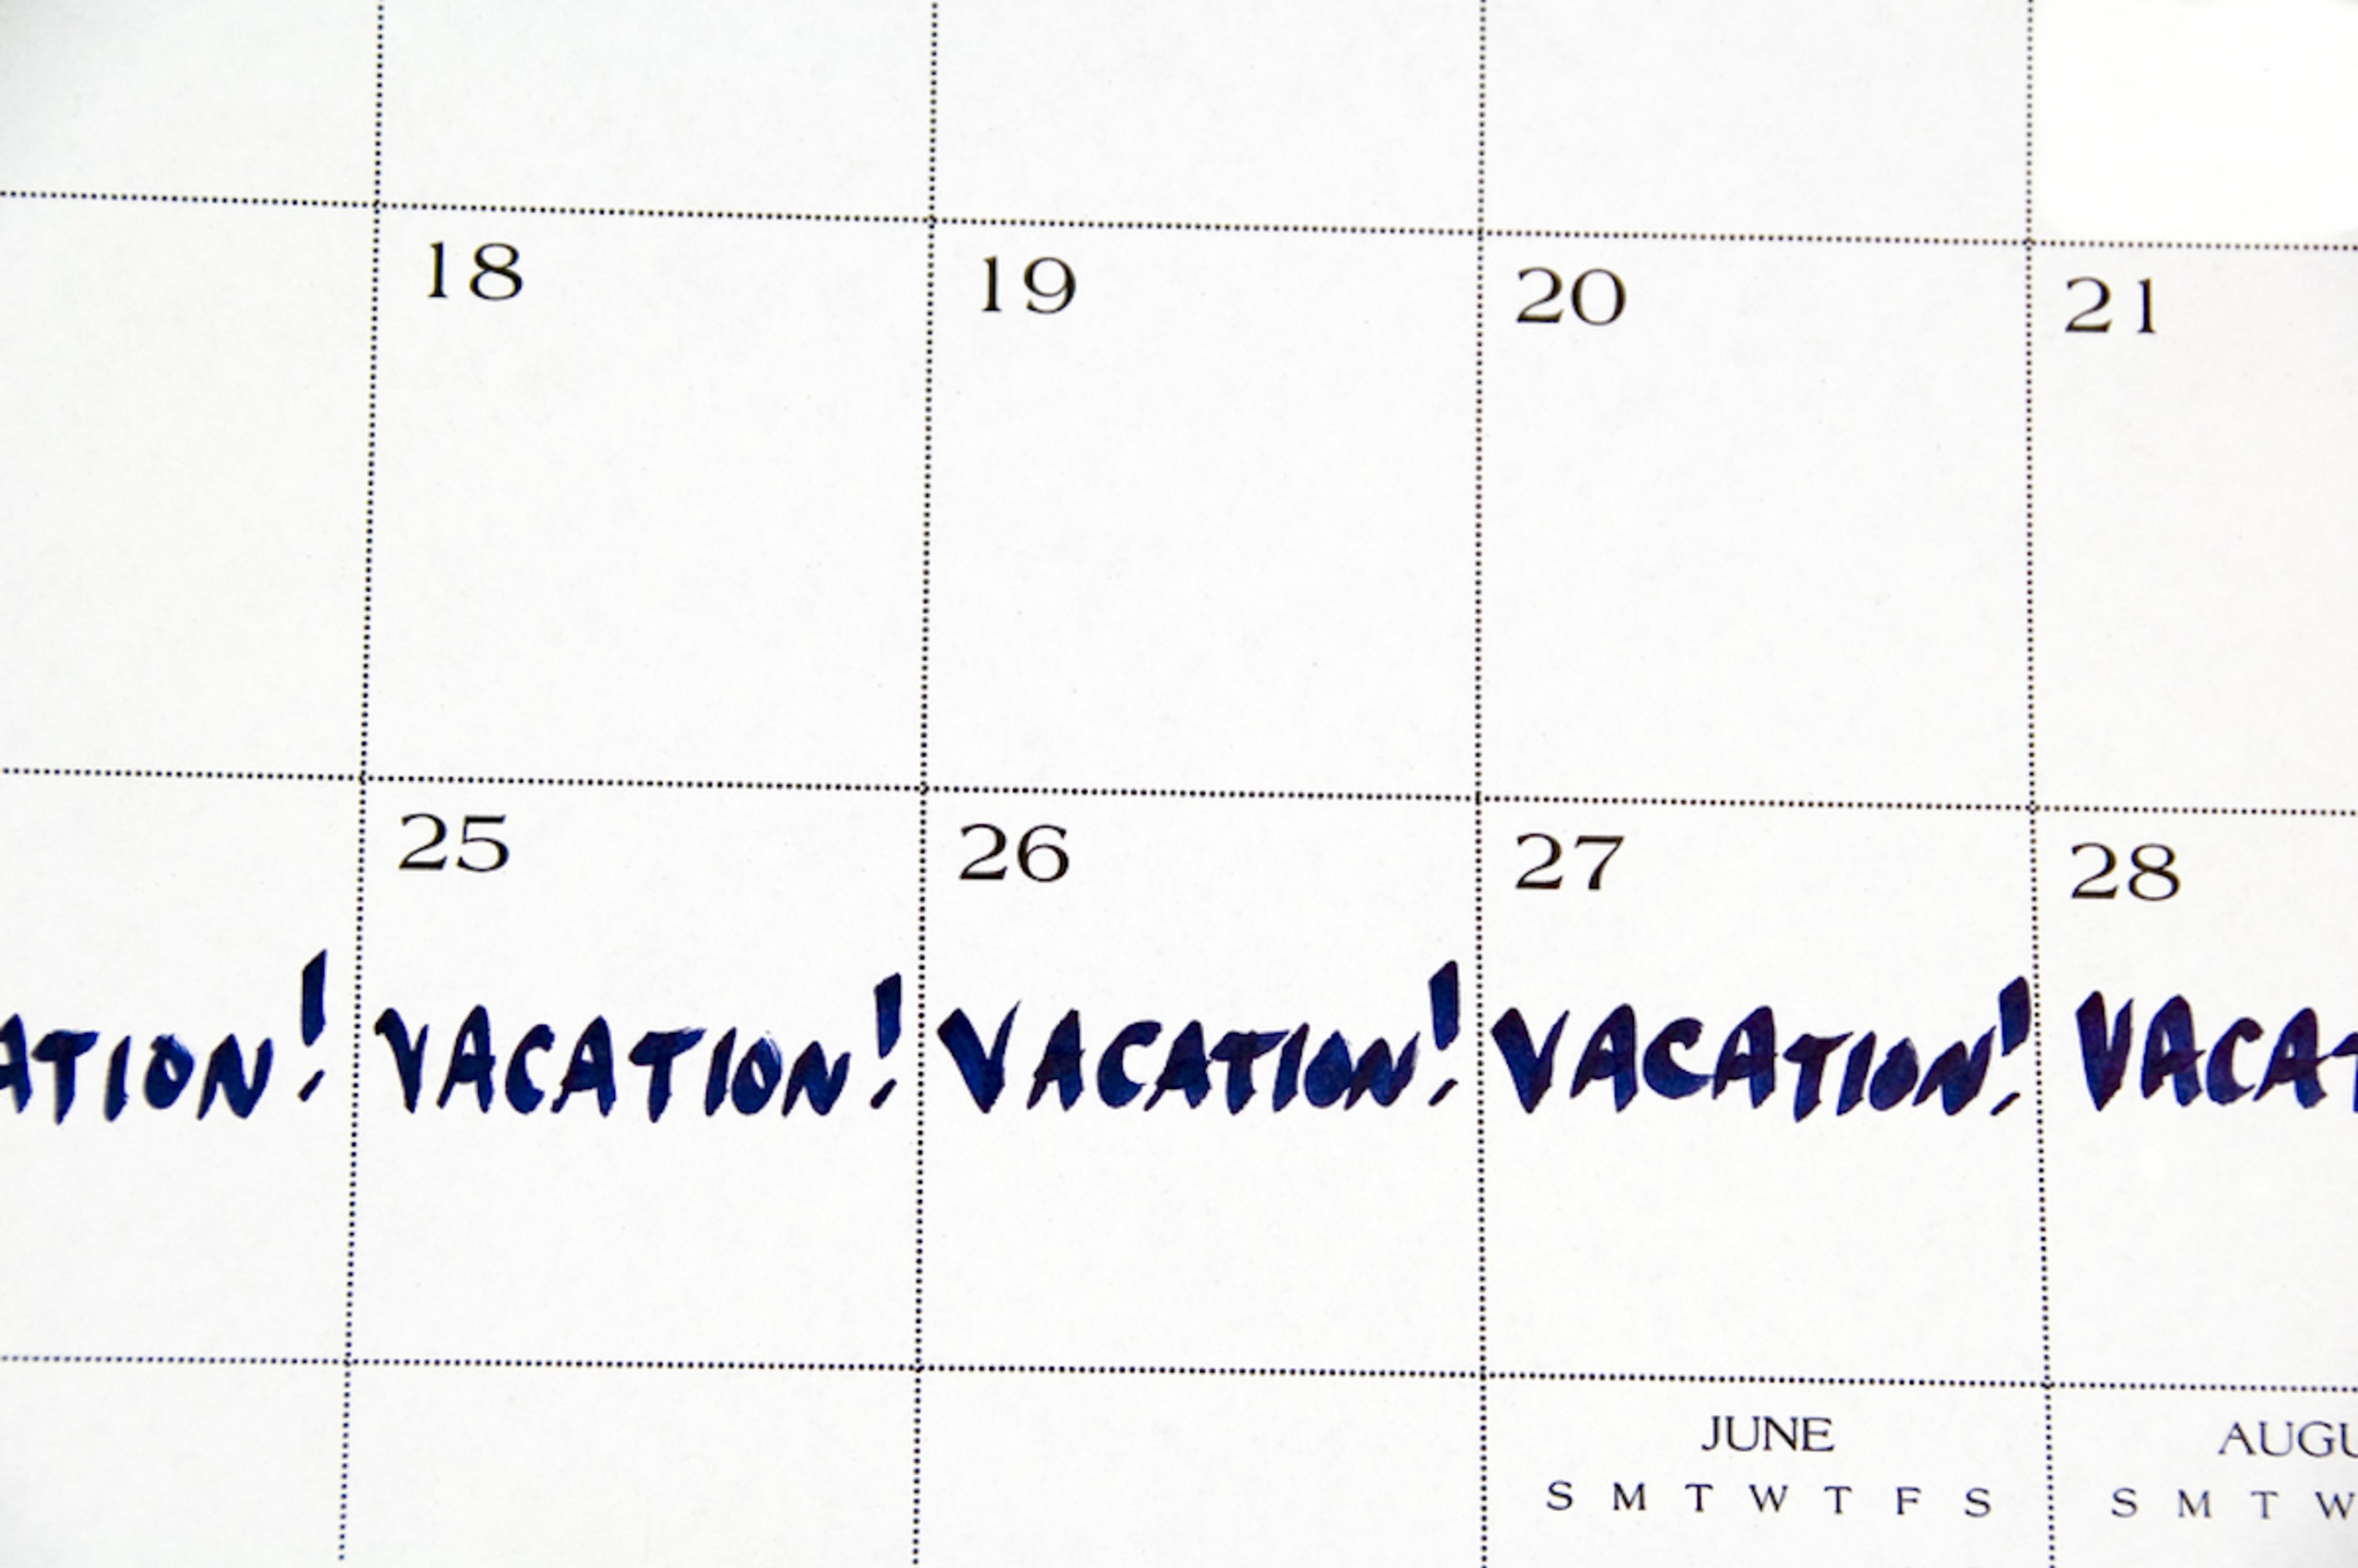 How to Manage Vacation Requests with Forms + Excel